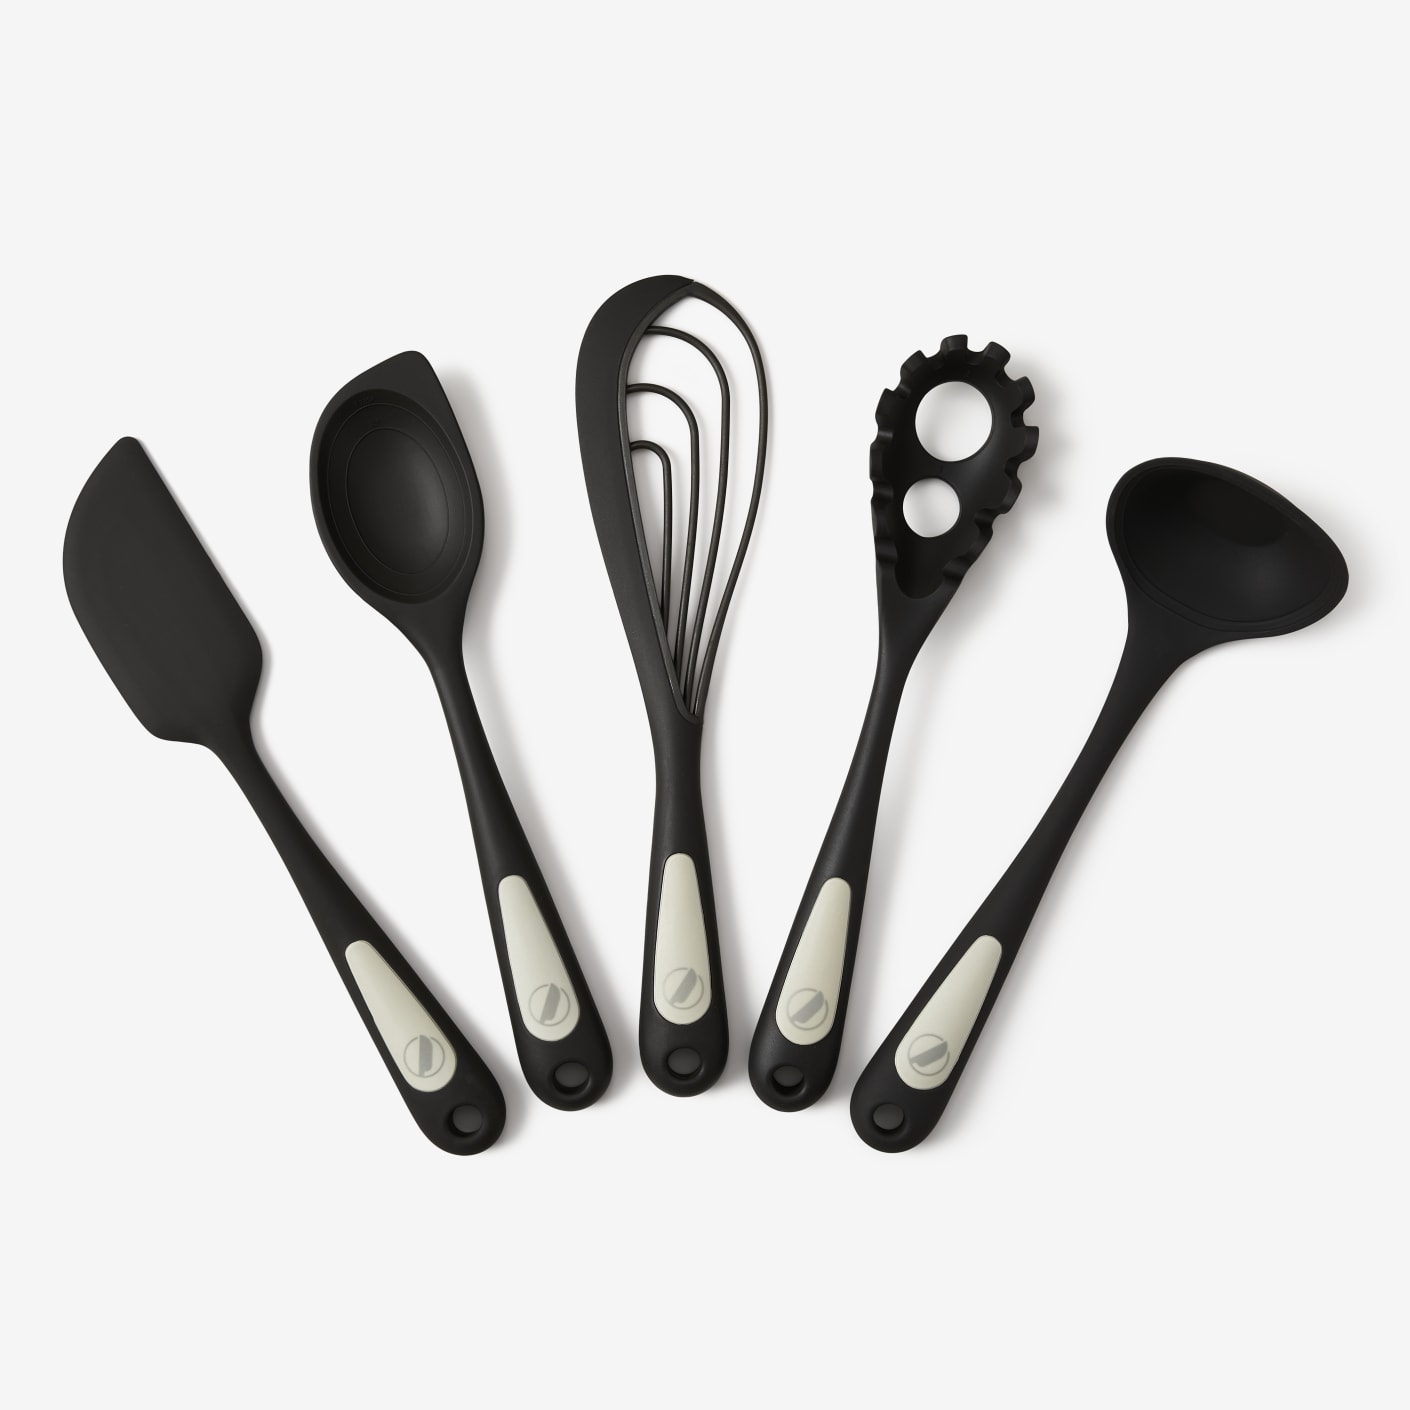 https://dam.bespokepost.com/image/upload/c_limit,dpr_auto,f_auto,q_auto,w_1410/v1/Storefront/2022%20/05-May/in-house/prepdeck-duet-cooking-utensils-black_1